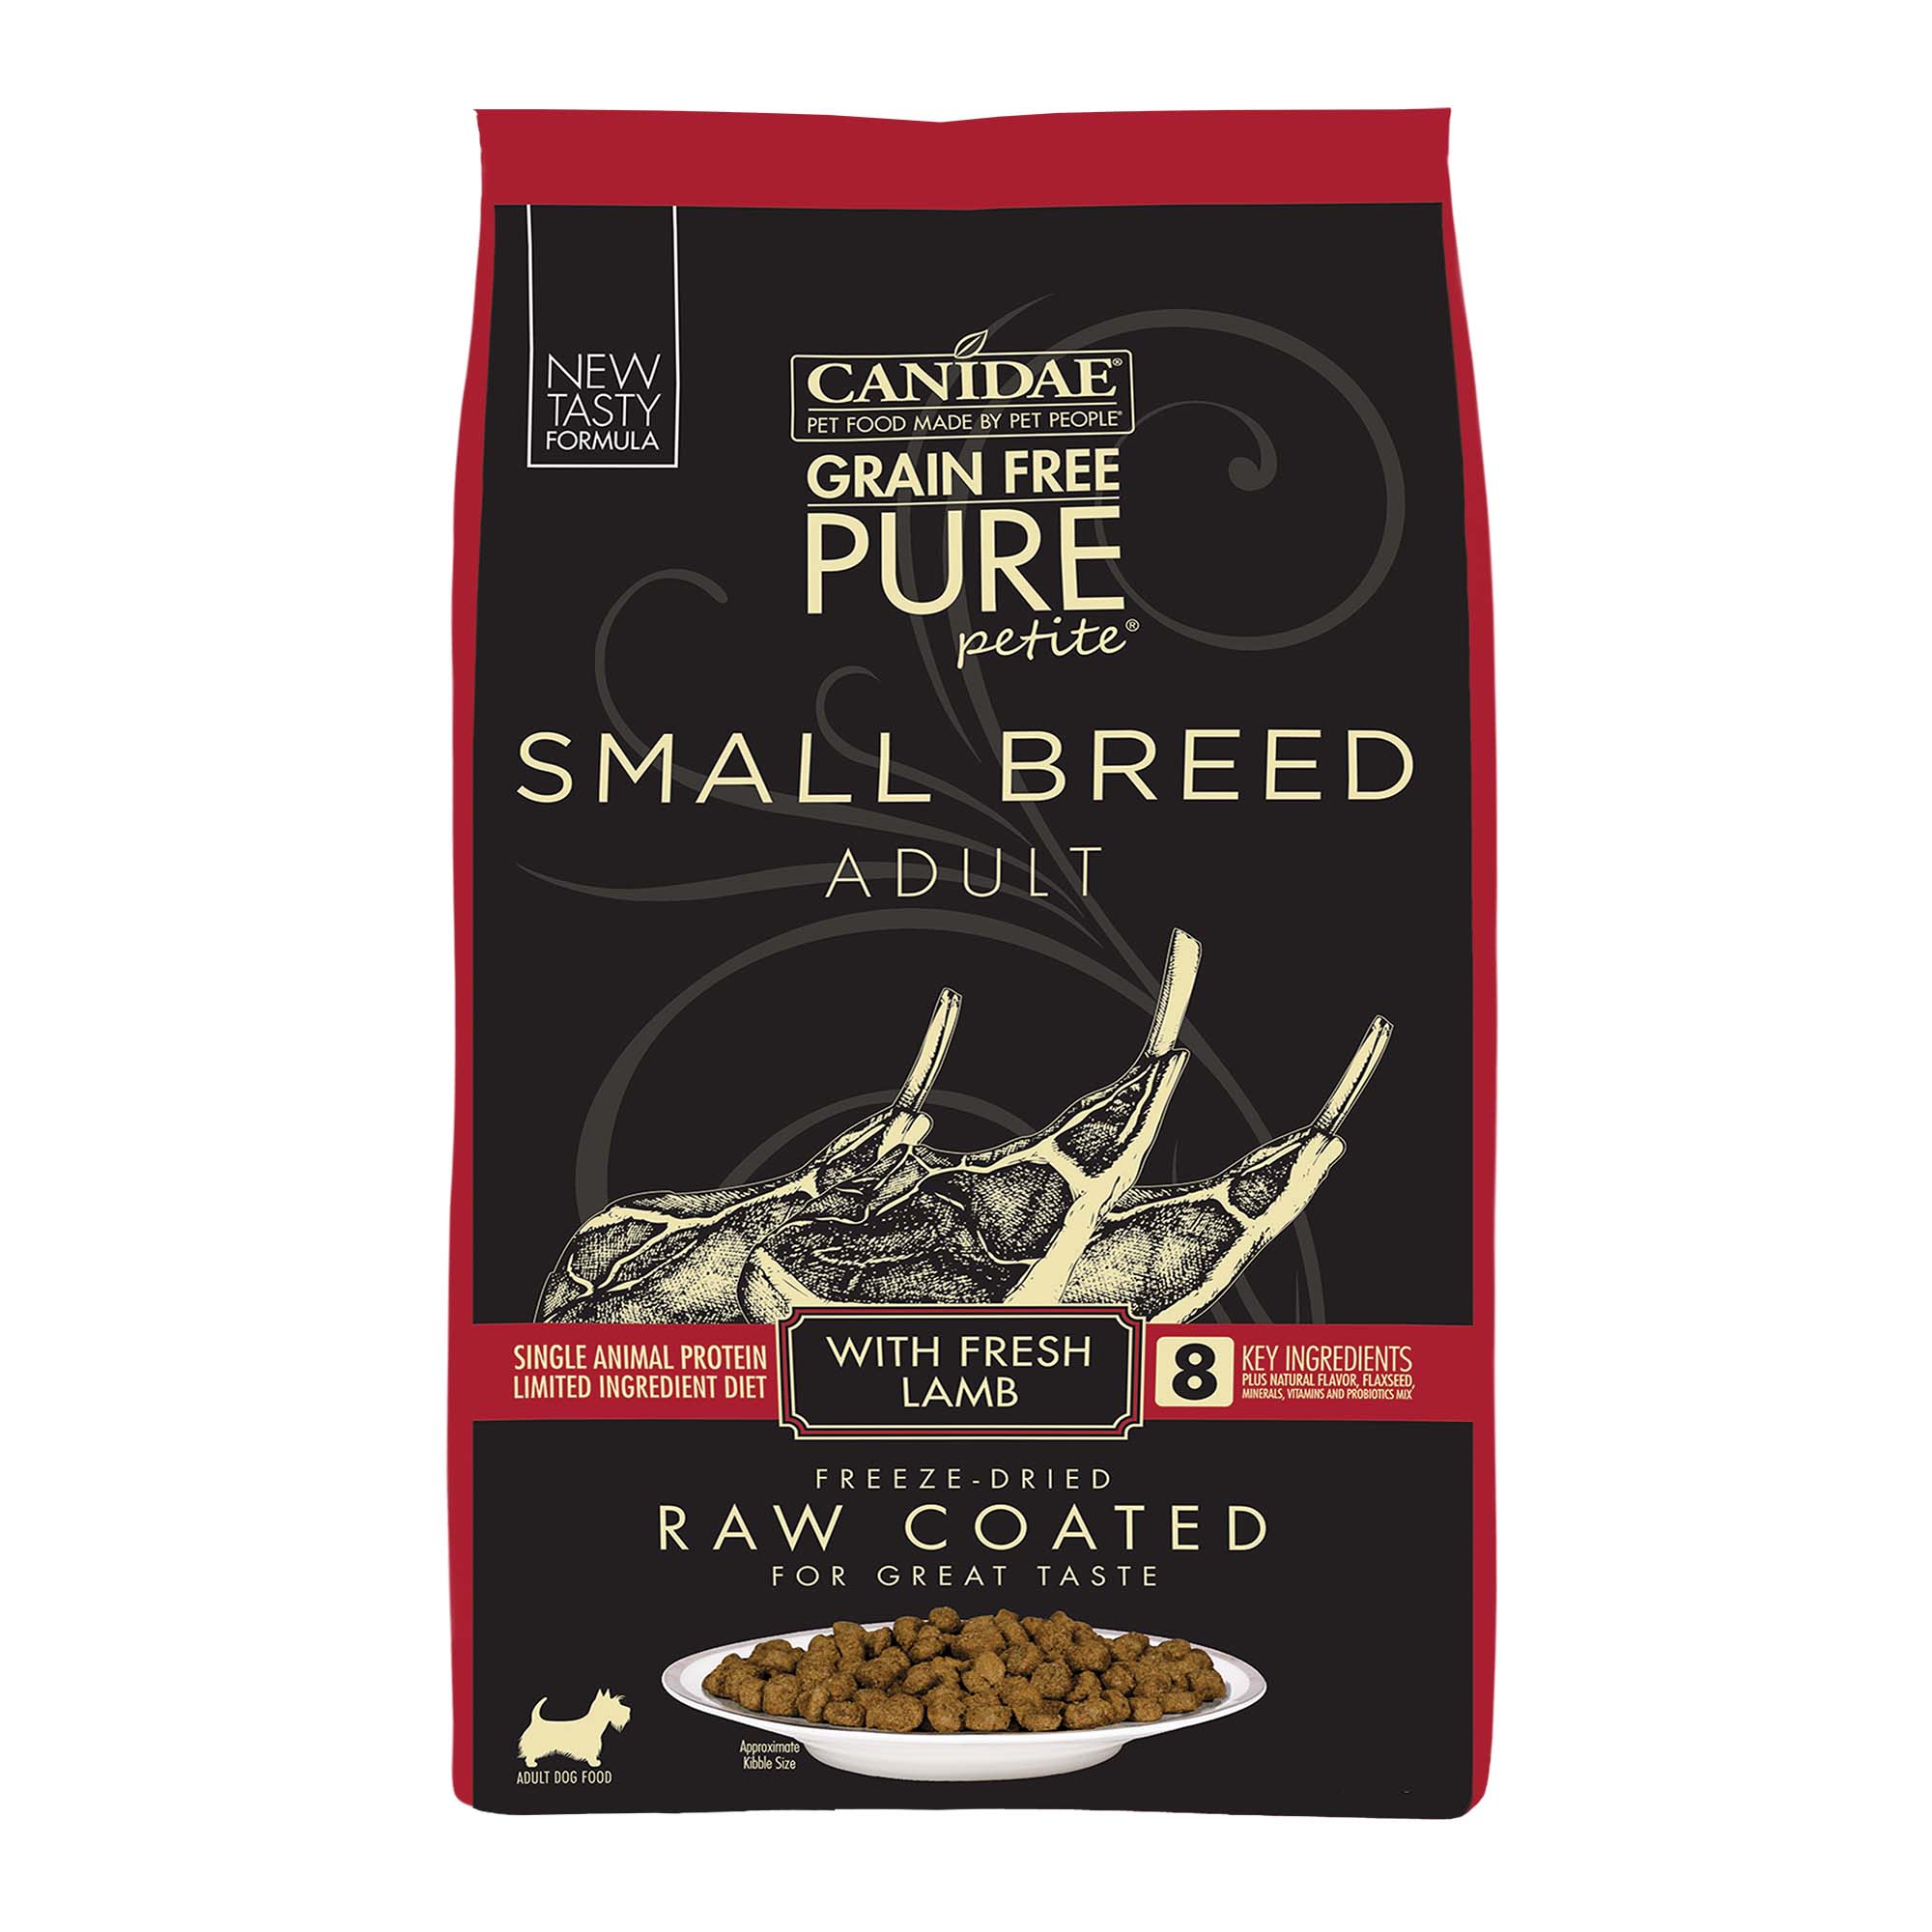 Canidae Pure Grain Free Petite Small Breed Limited Ingredient Diet with Fresh Lamb Freeze Dried Raw Coated Dry Dog Food